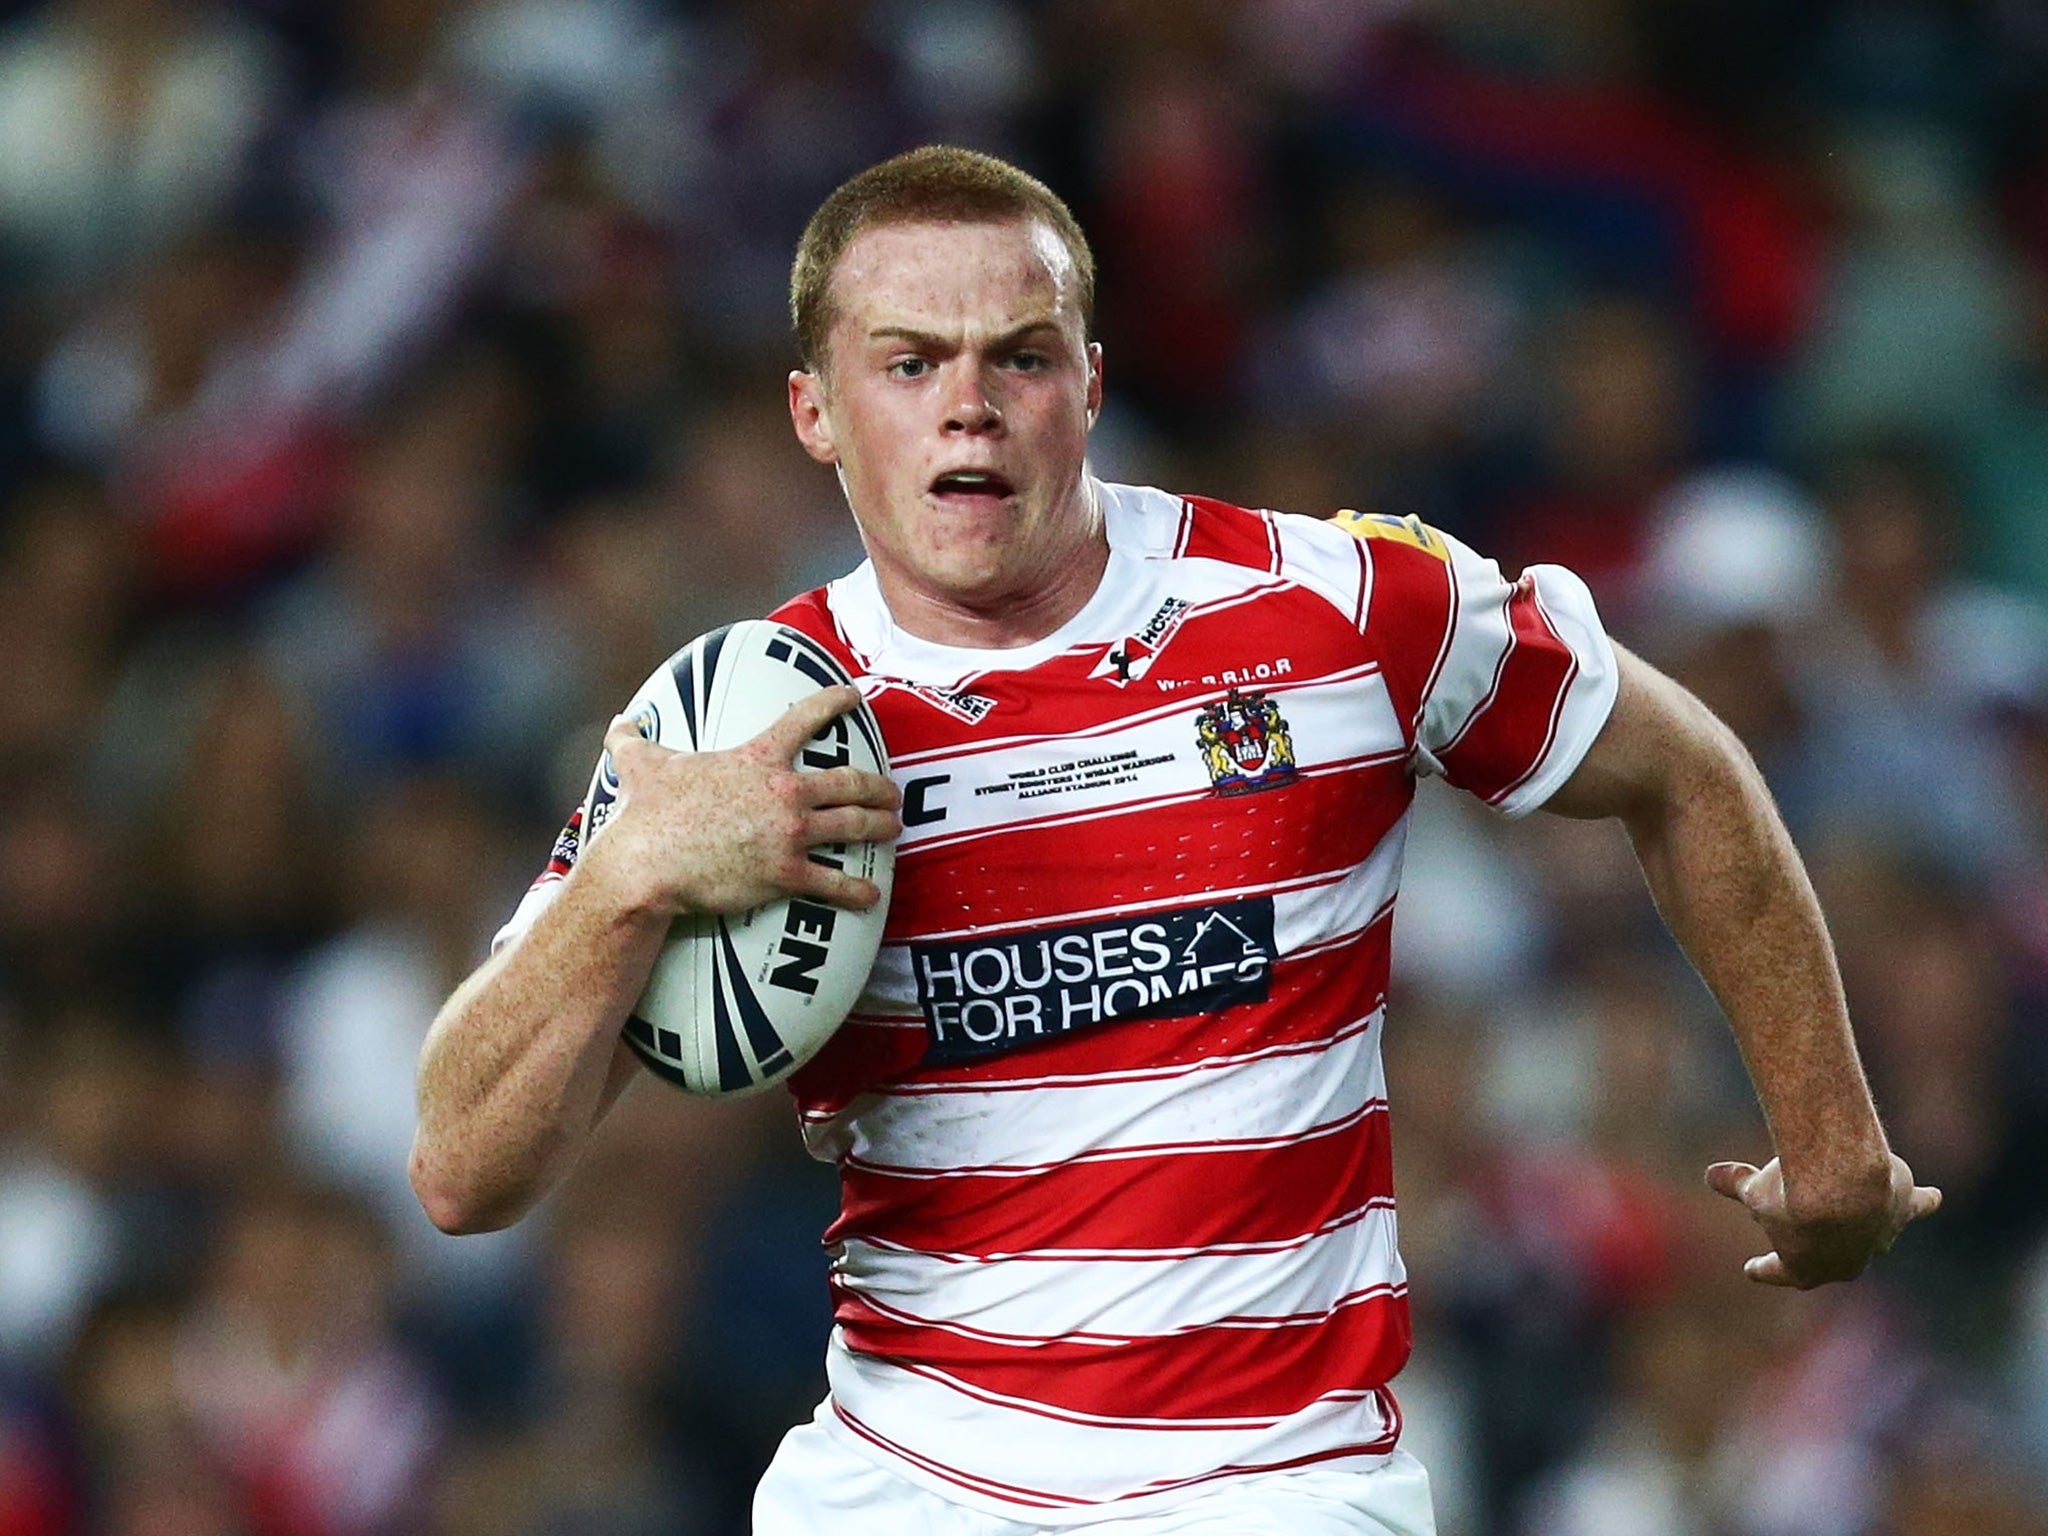 Joe Burgess scored the try 10 minutes from time that avenged Wigan’s Grand Final defeat